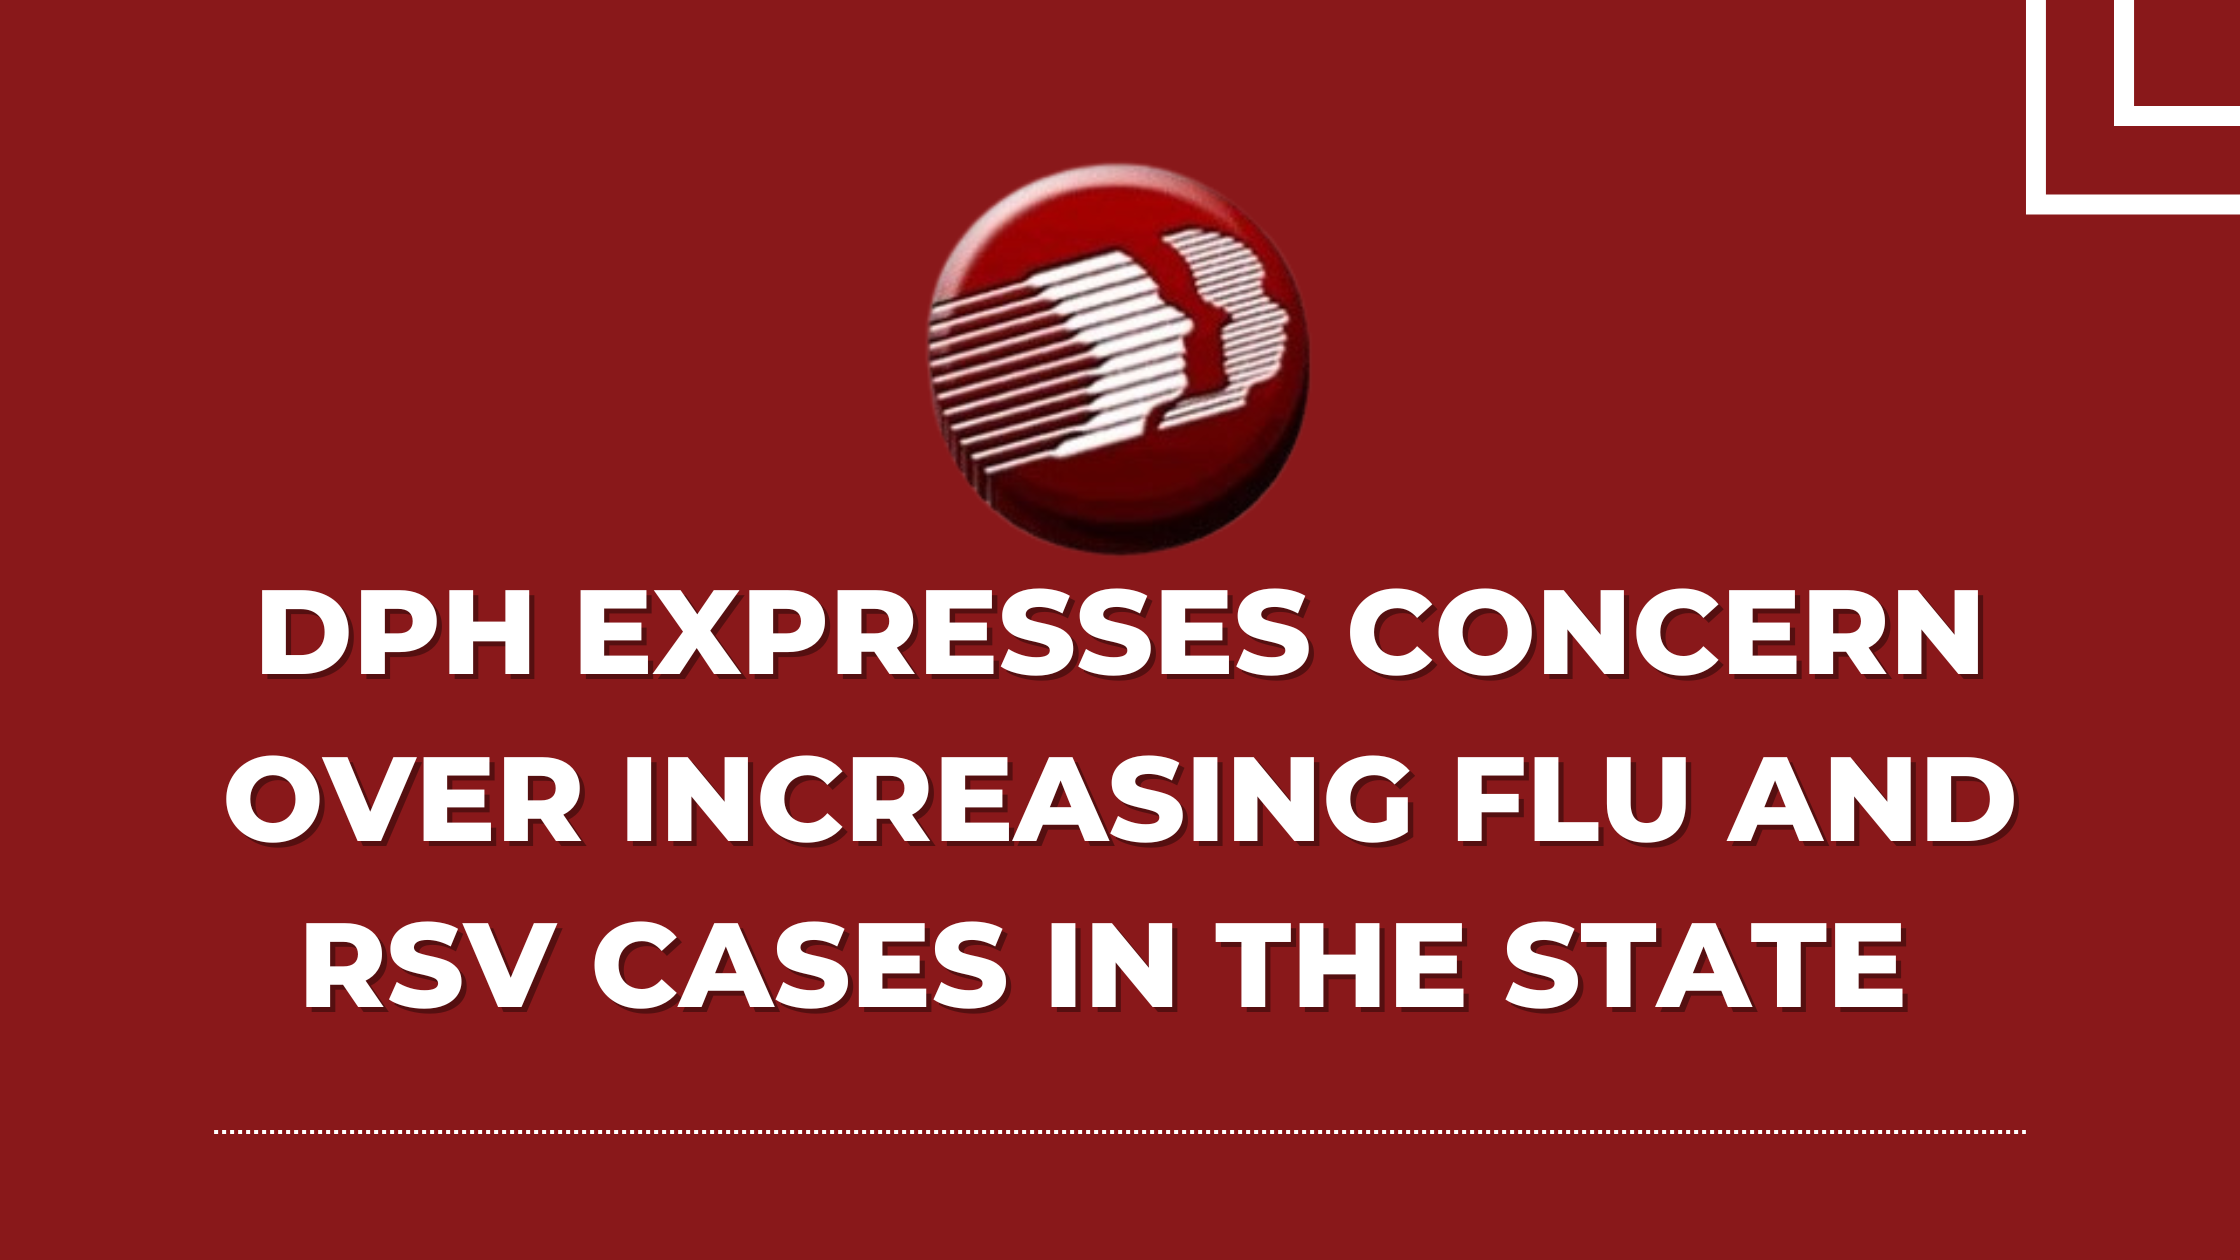 DPH EXPRESSES CONCERN OVER INCREASING FLU AND RSV CASES IN THE STATE